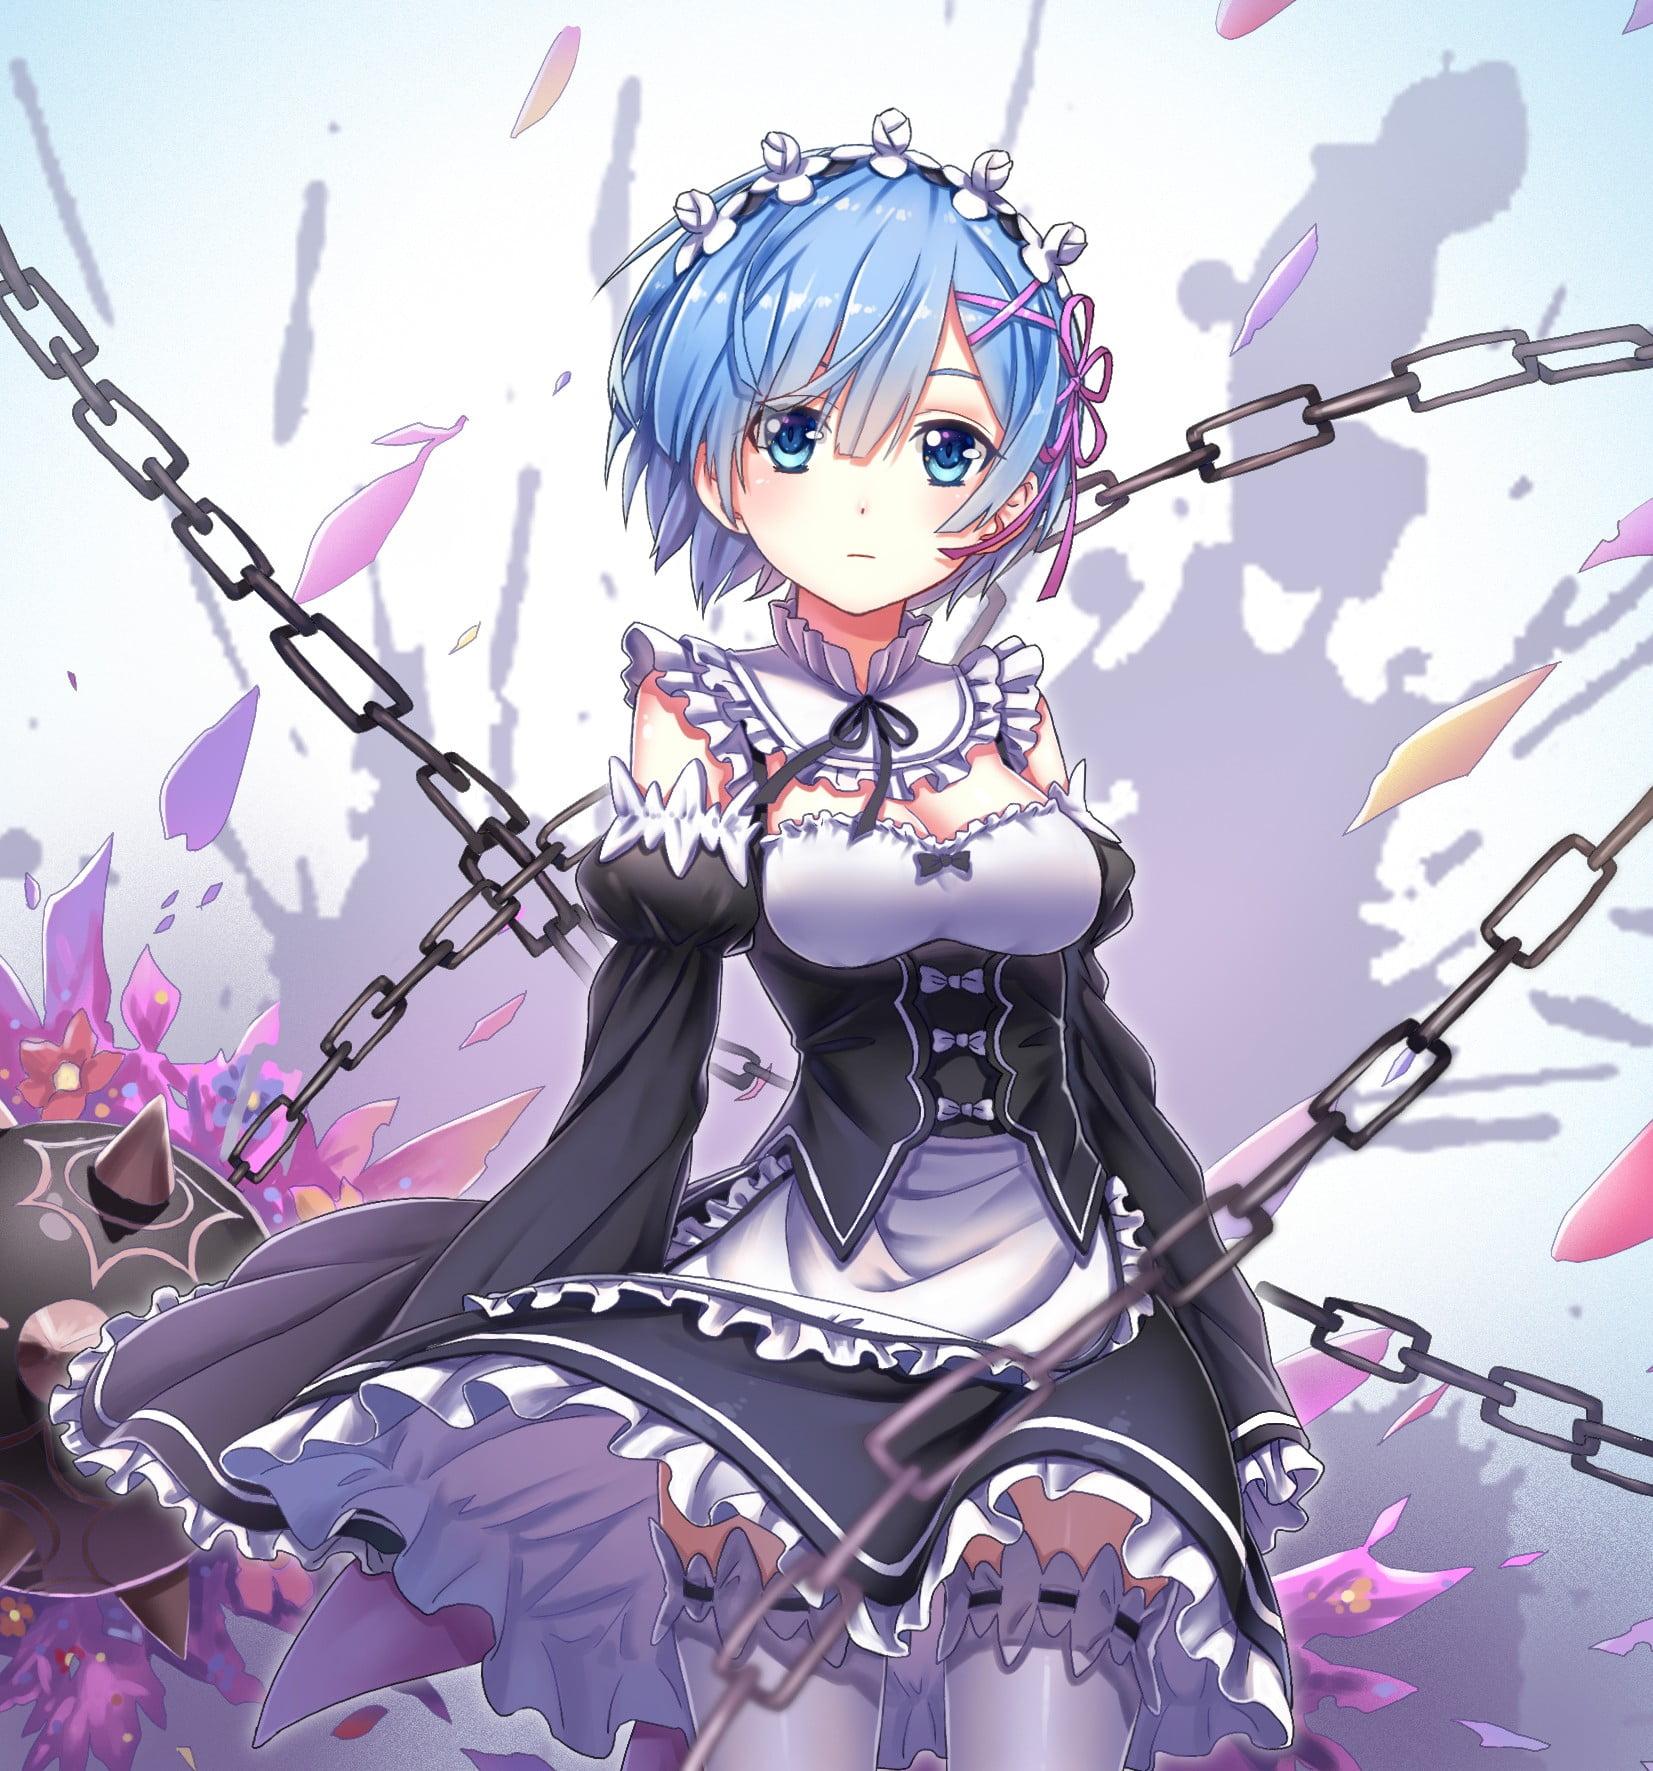 Rem Anime Wallpapers Wallpaper Cave